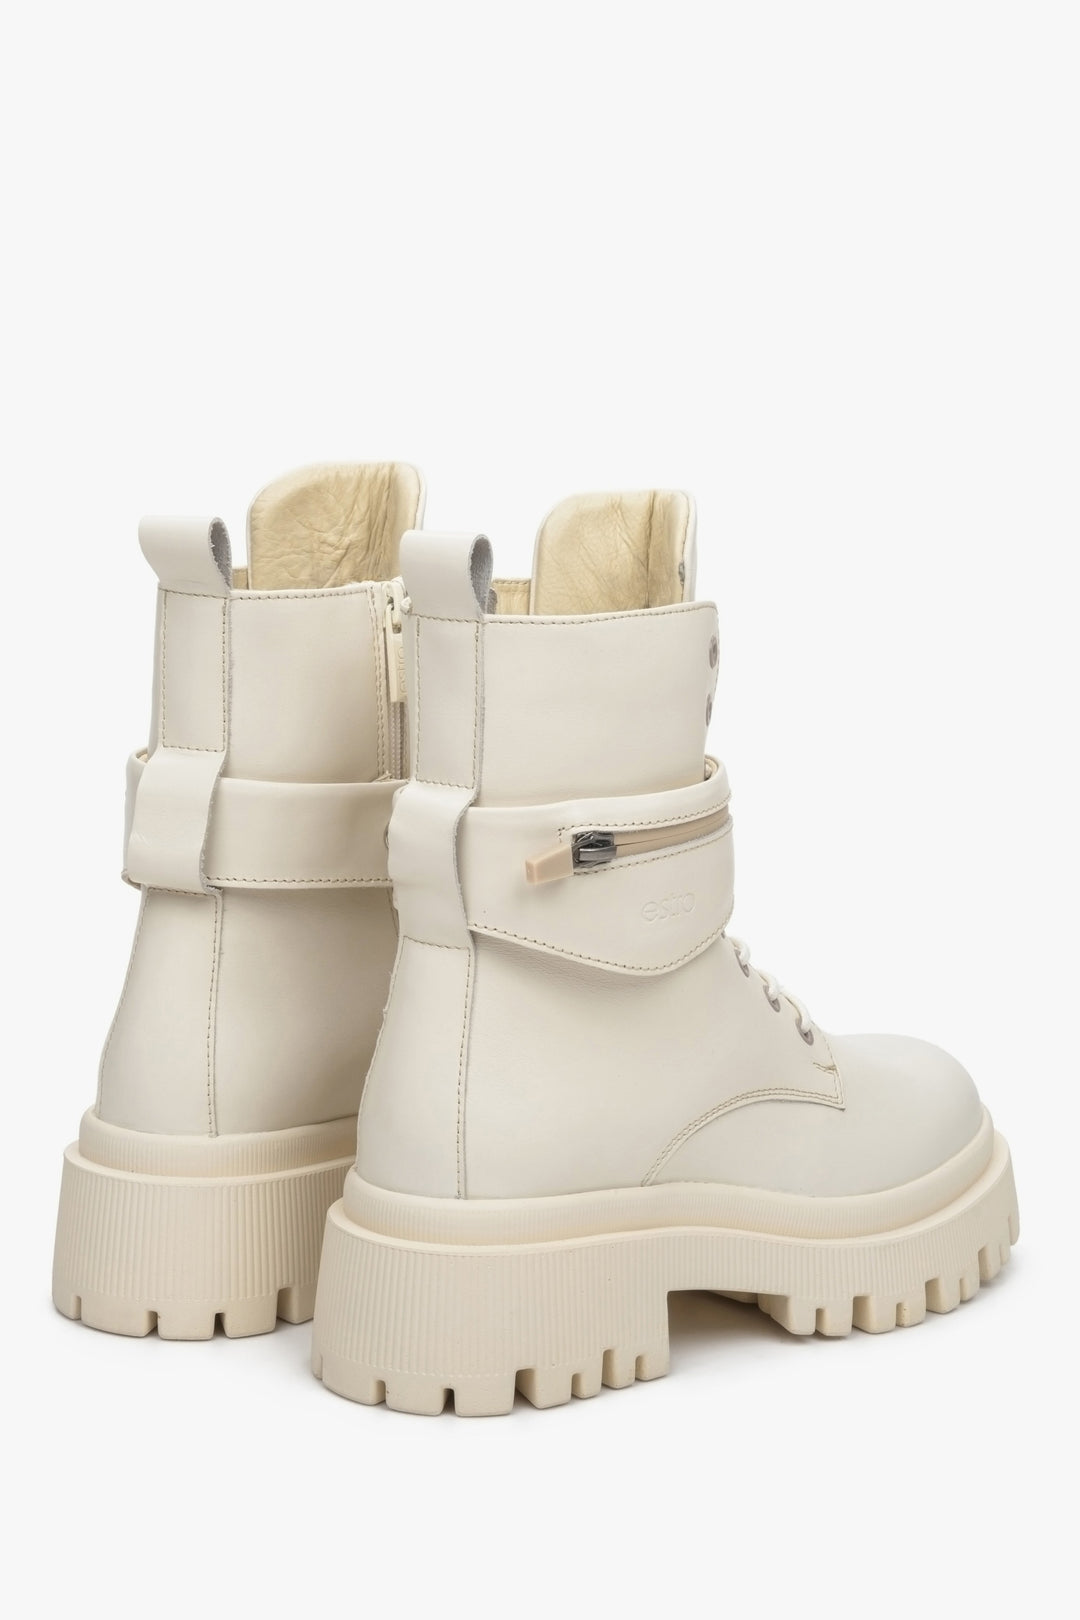 Women's high Estro winter ankle boots on a platform with lacing and a zipper - the back of the shoe is light beige.